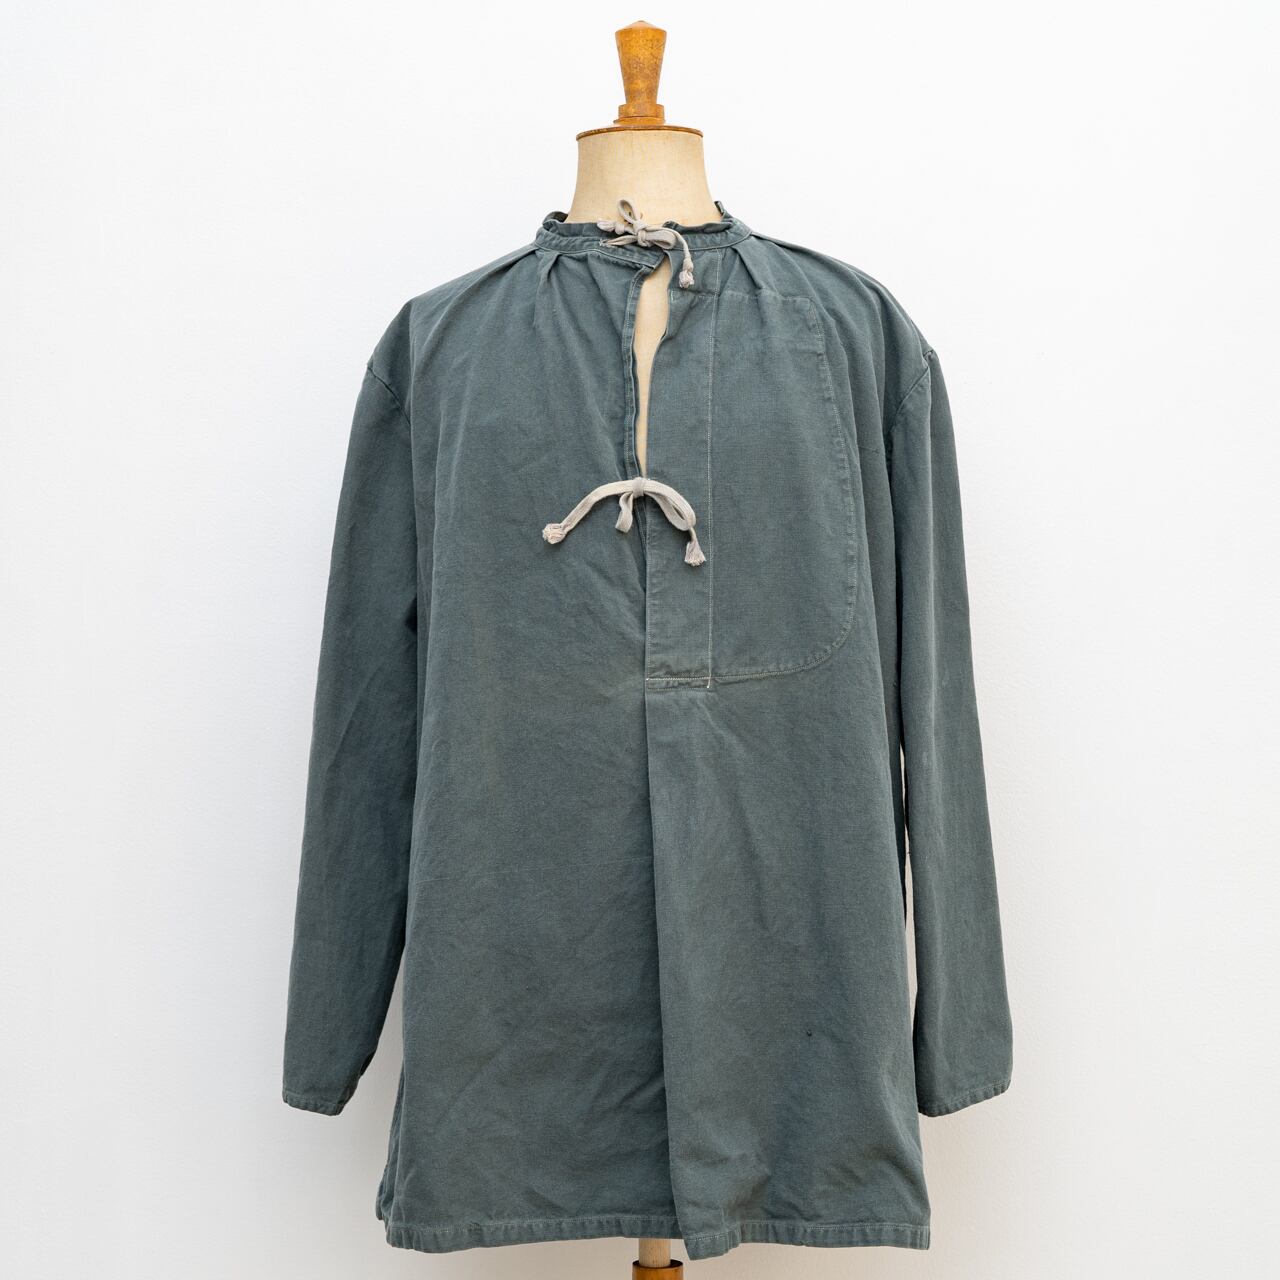 1940's SWISS ARMY MOUNTAIN TROOPS SMOCK | STRAYSHEEP ONLINE powered by BASE